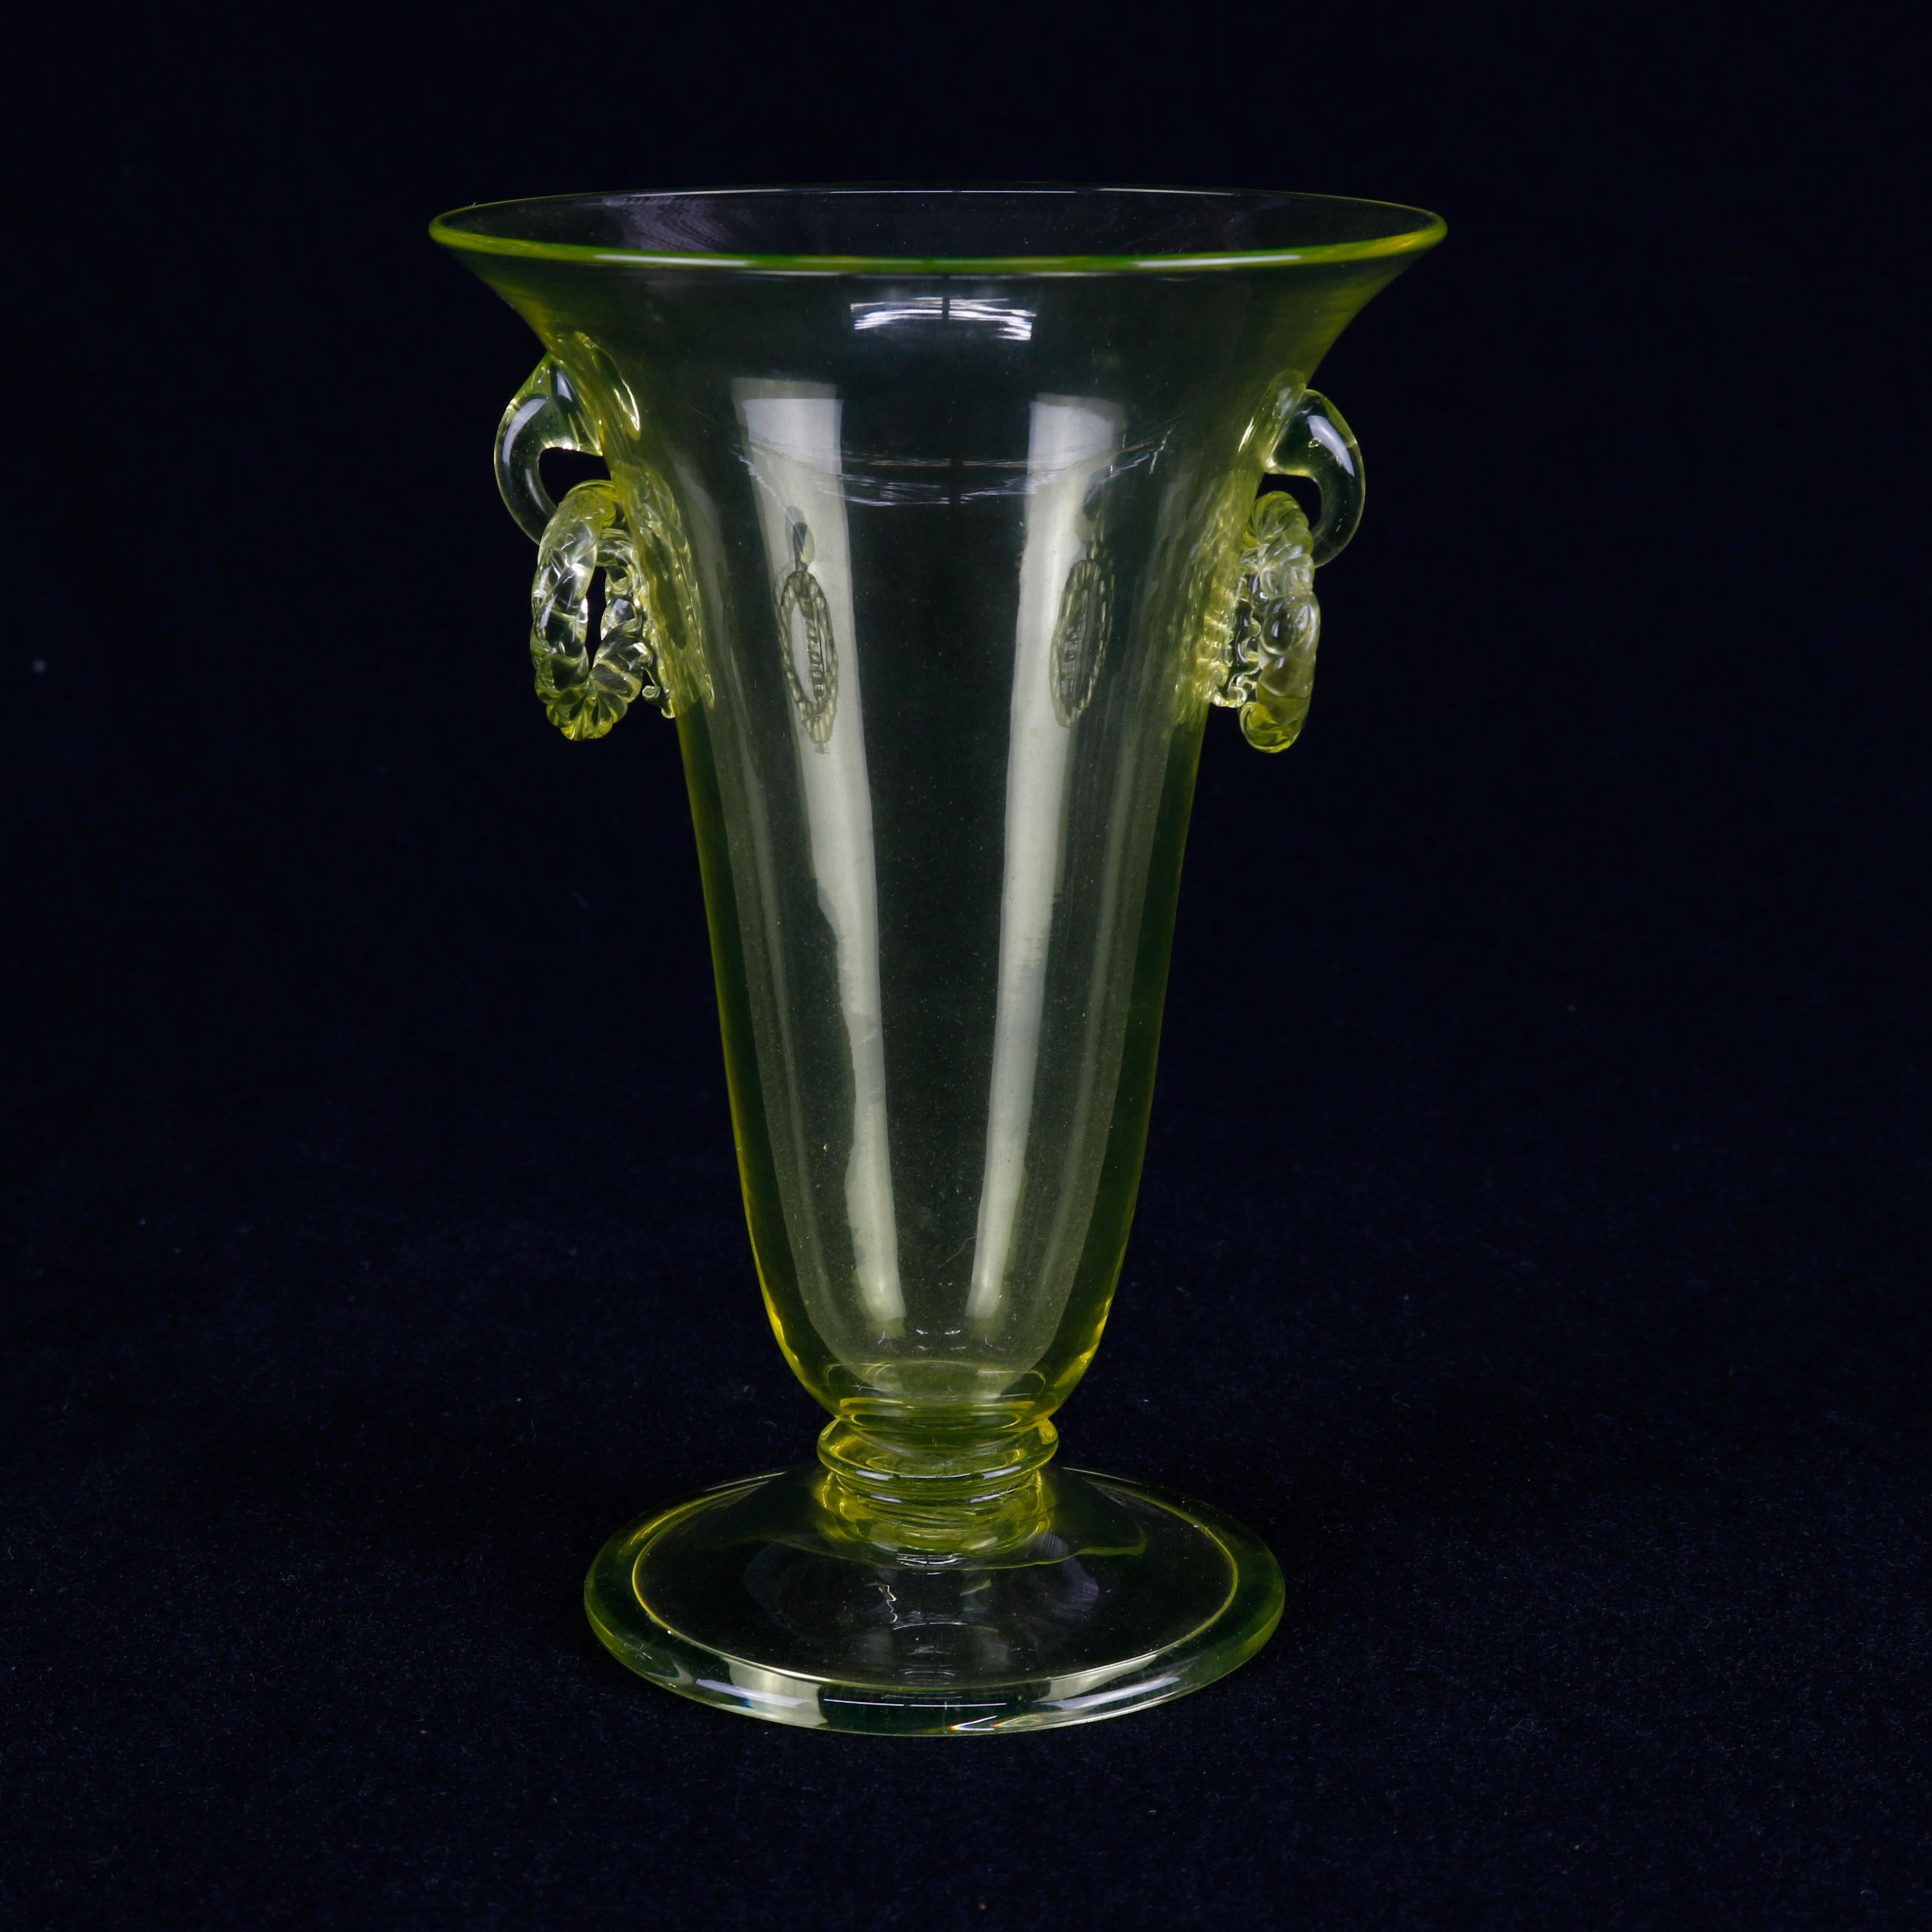 A vintage Steuben handcrafted art glass vase offers amber yellow flared form with flaking ring handles and seated on round foot, unsigned, 20th century.

Measures: 6